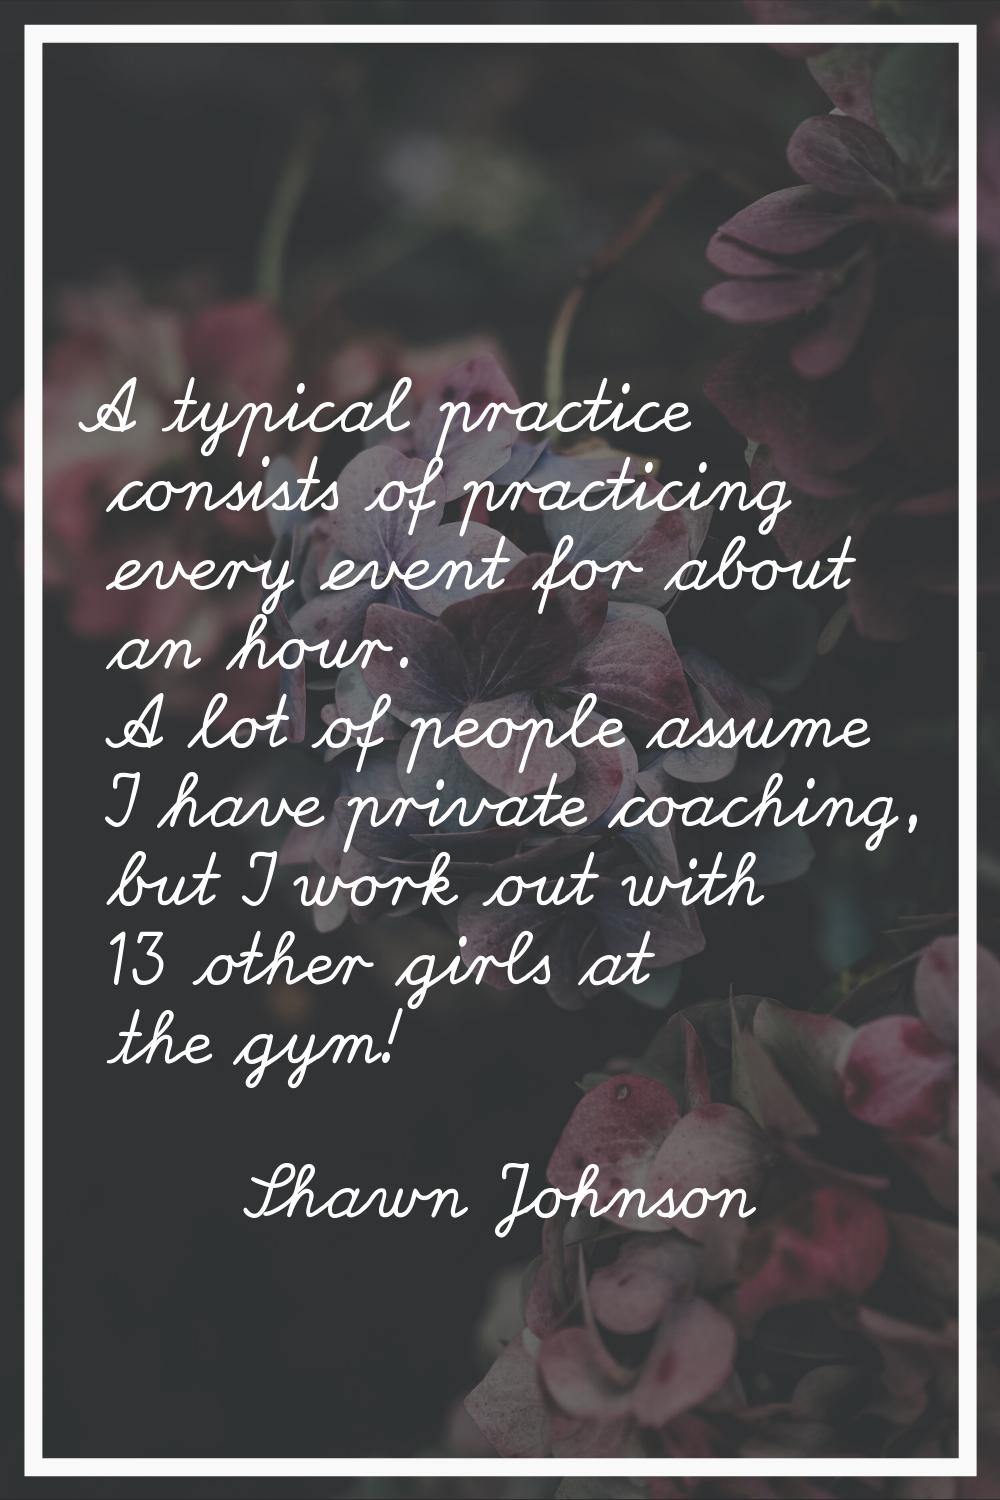 A typical practice consists of practicing every event for about an hour. A lot of people assume I h